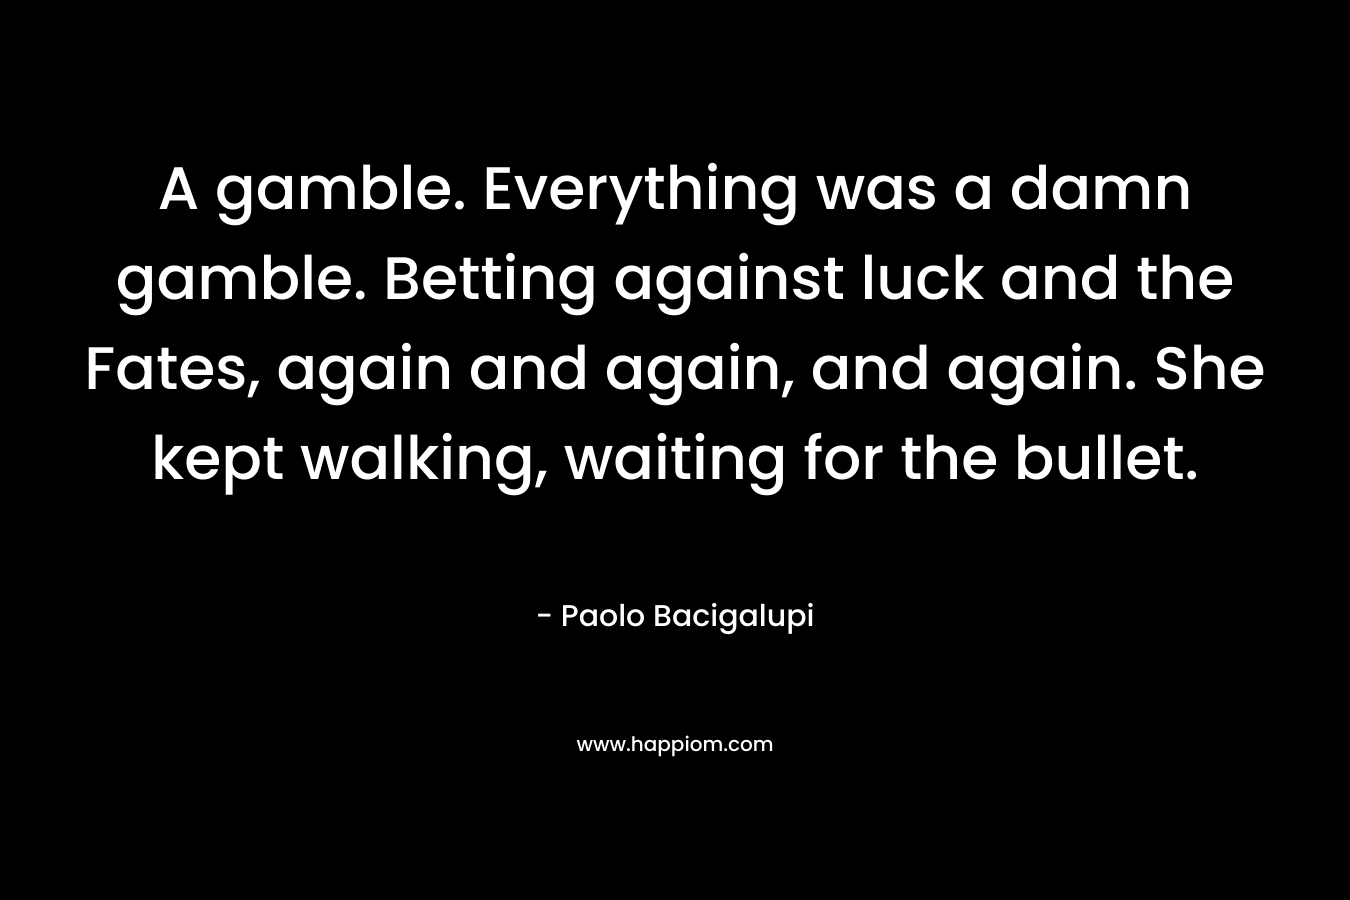 A gamble. Everything was a damn gamble. Betting against luck and the Fates, again and again, and again. She kept walking, waiting for the bullet. – Paolo Bacigalupi